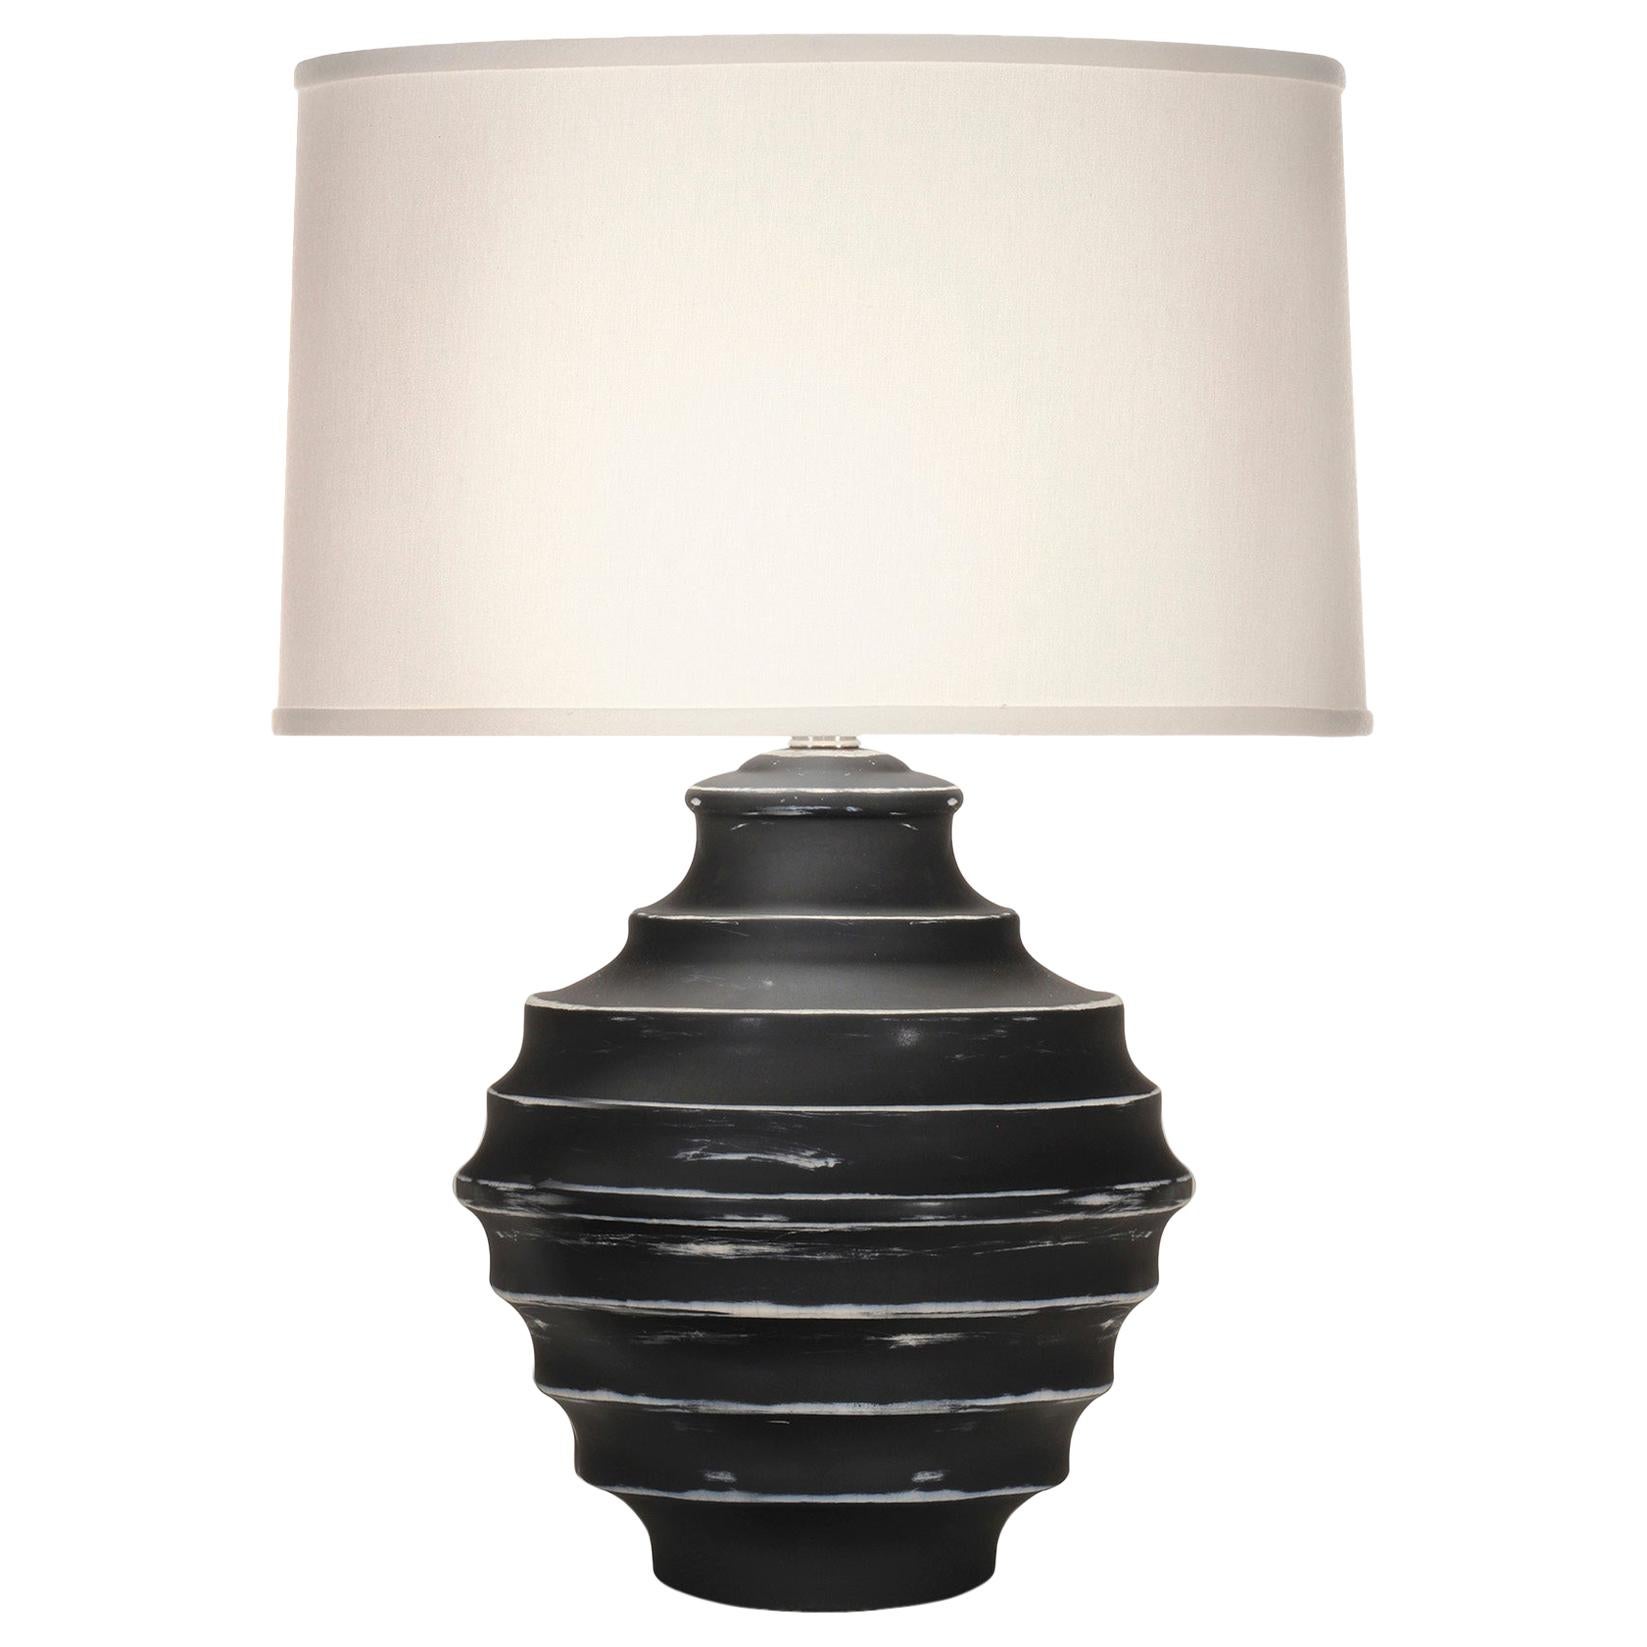 Connerly Table Lamp in Black by CuratedKravet